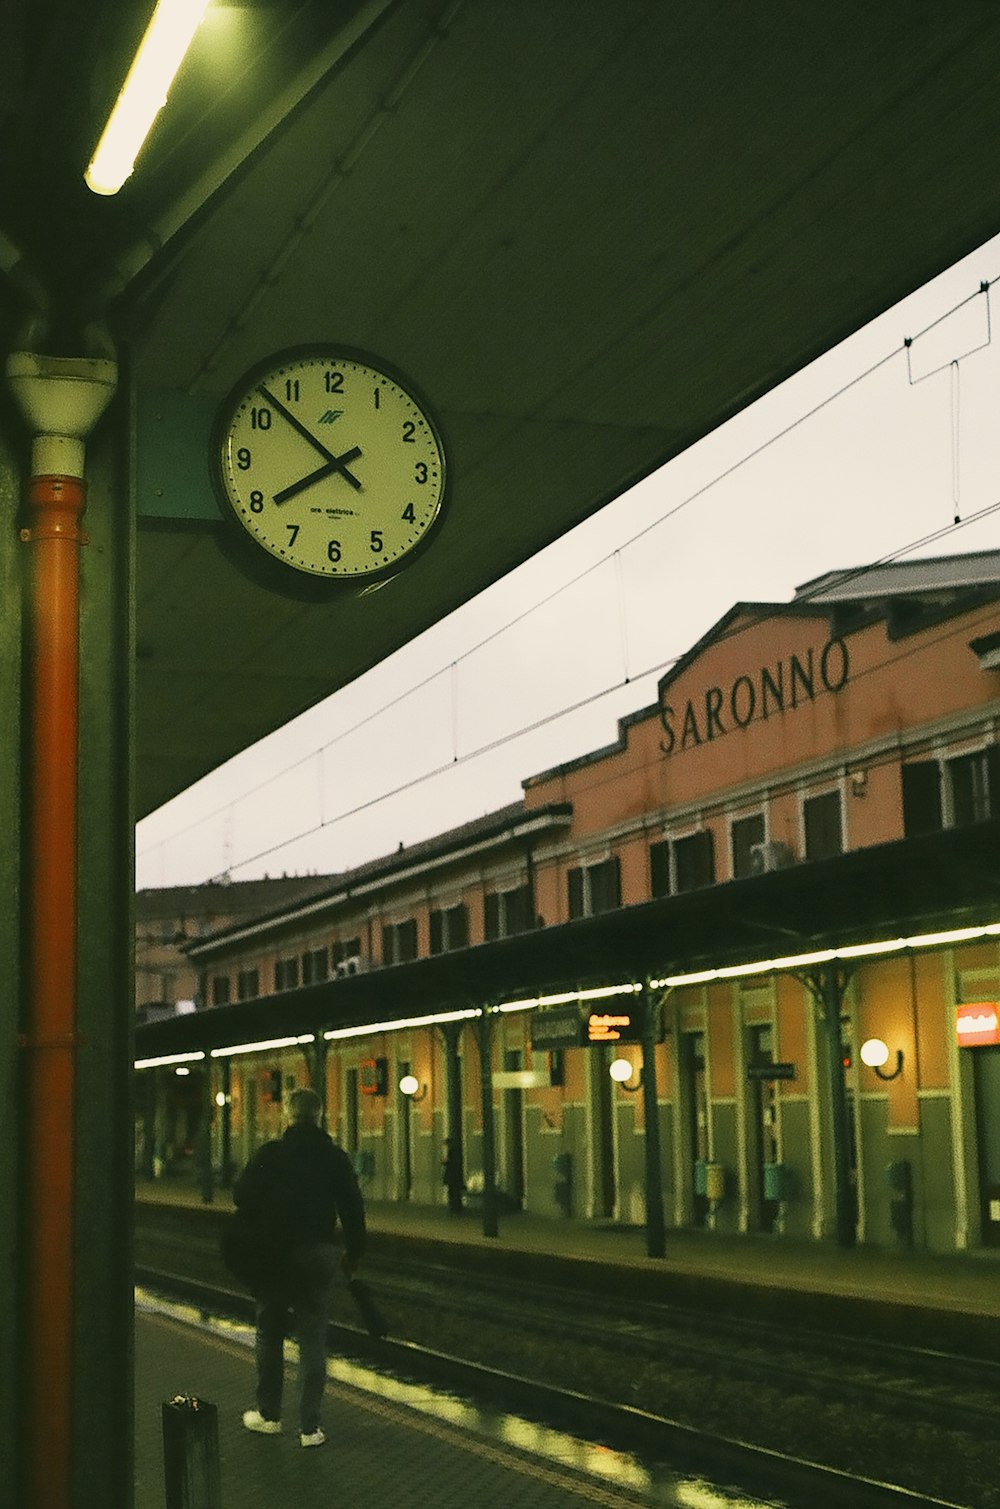 white and black analog wall clock in train station at 7:52